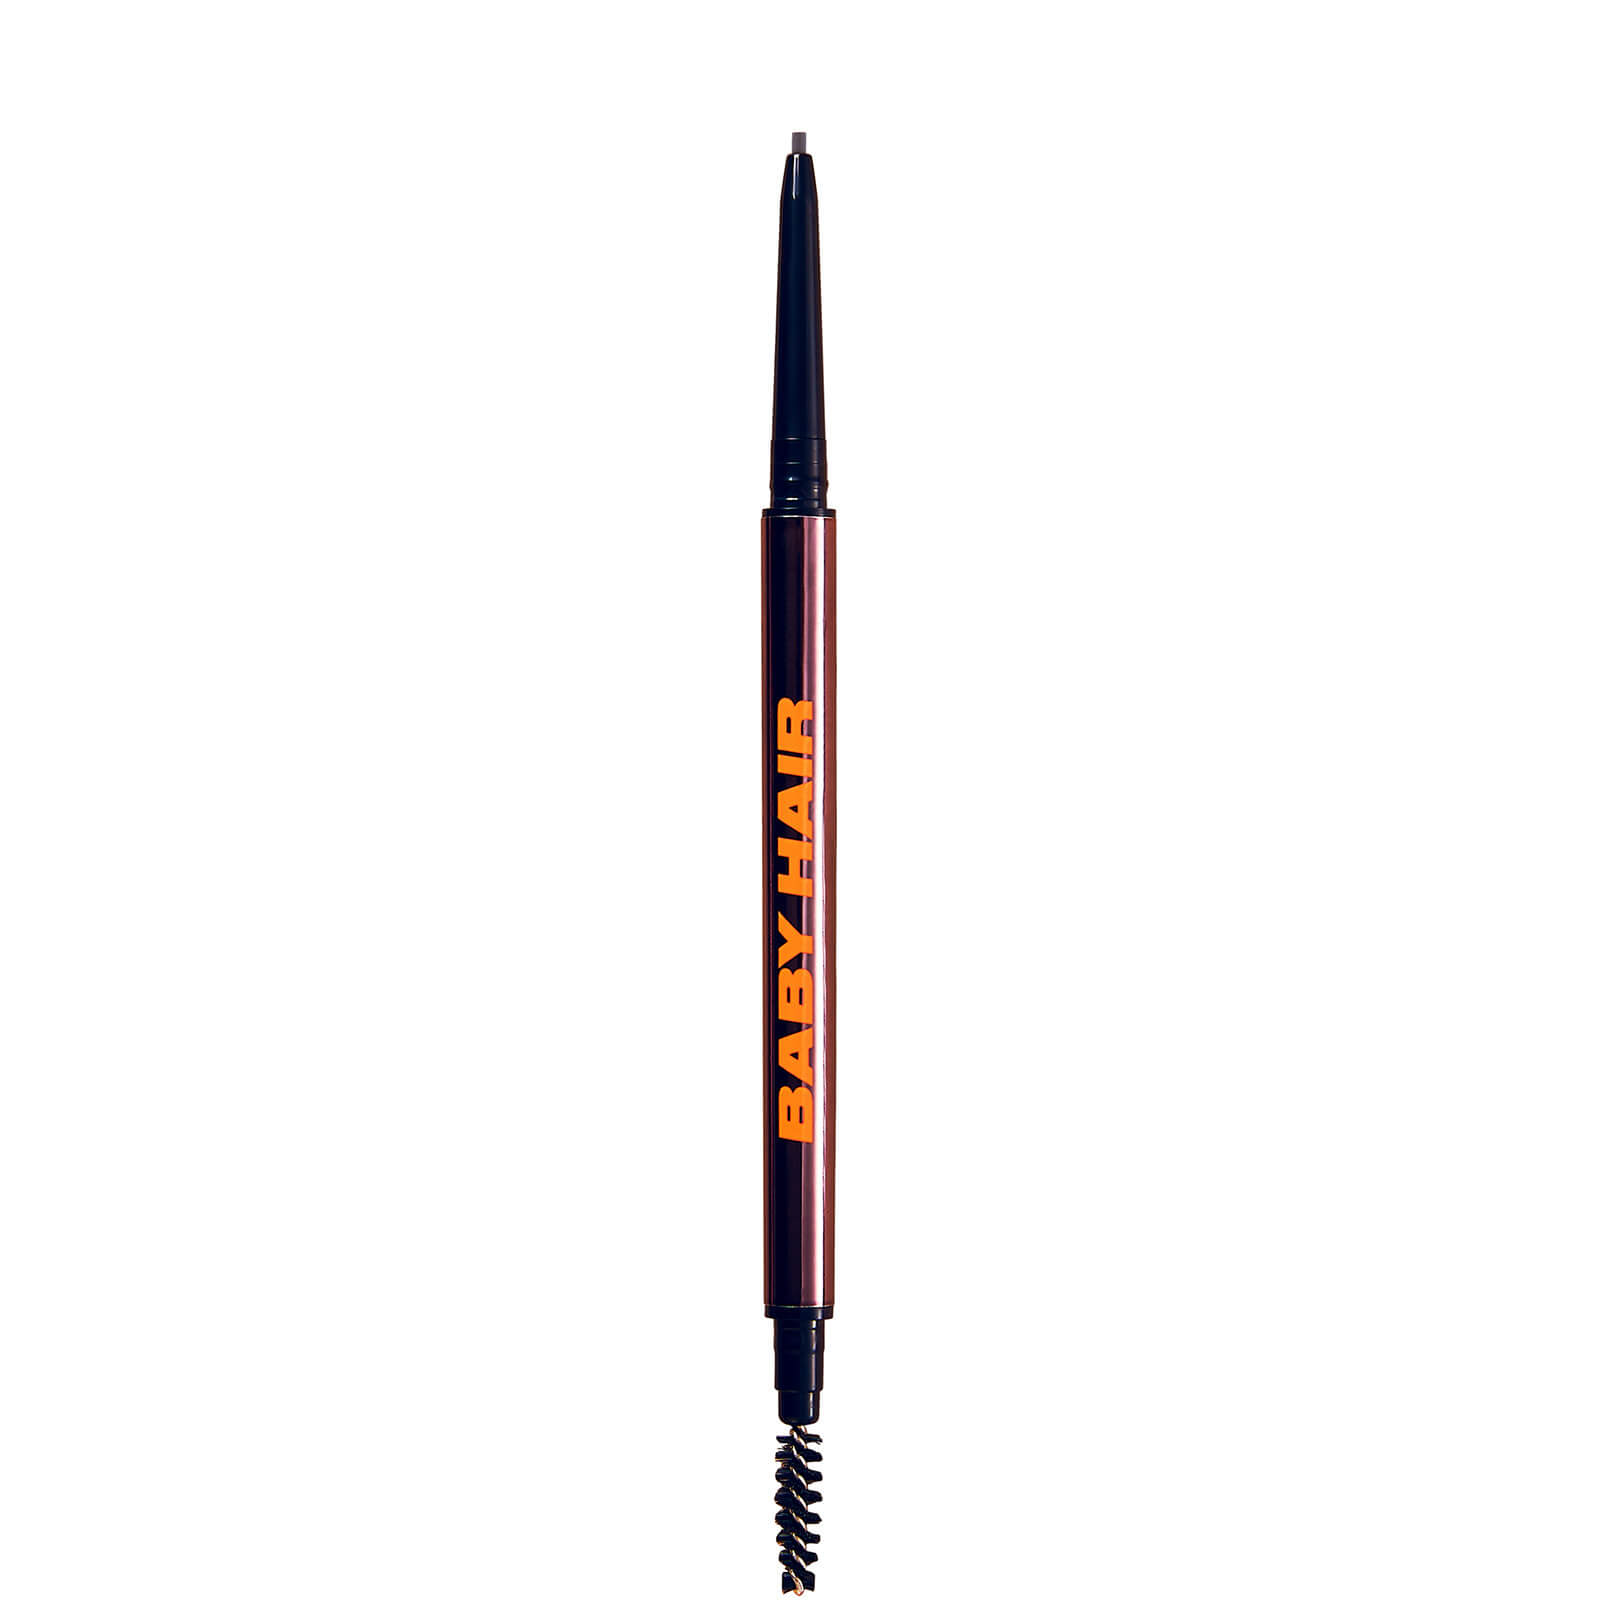 UOMA Beauty Brow Fro Baby Hair Brow Pencil 5ml (Various Shades) - 5 von UOMA